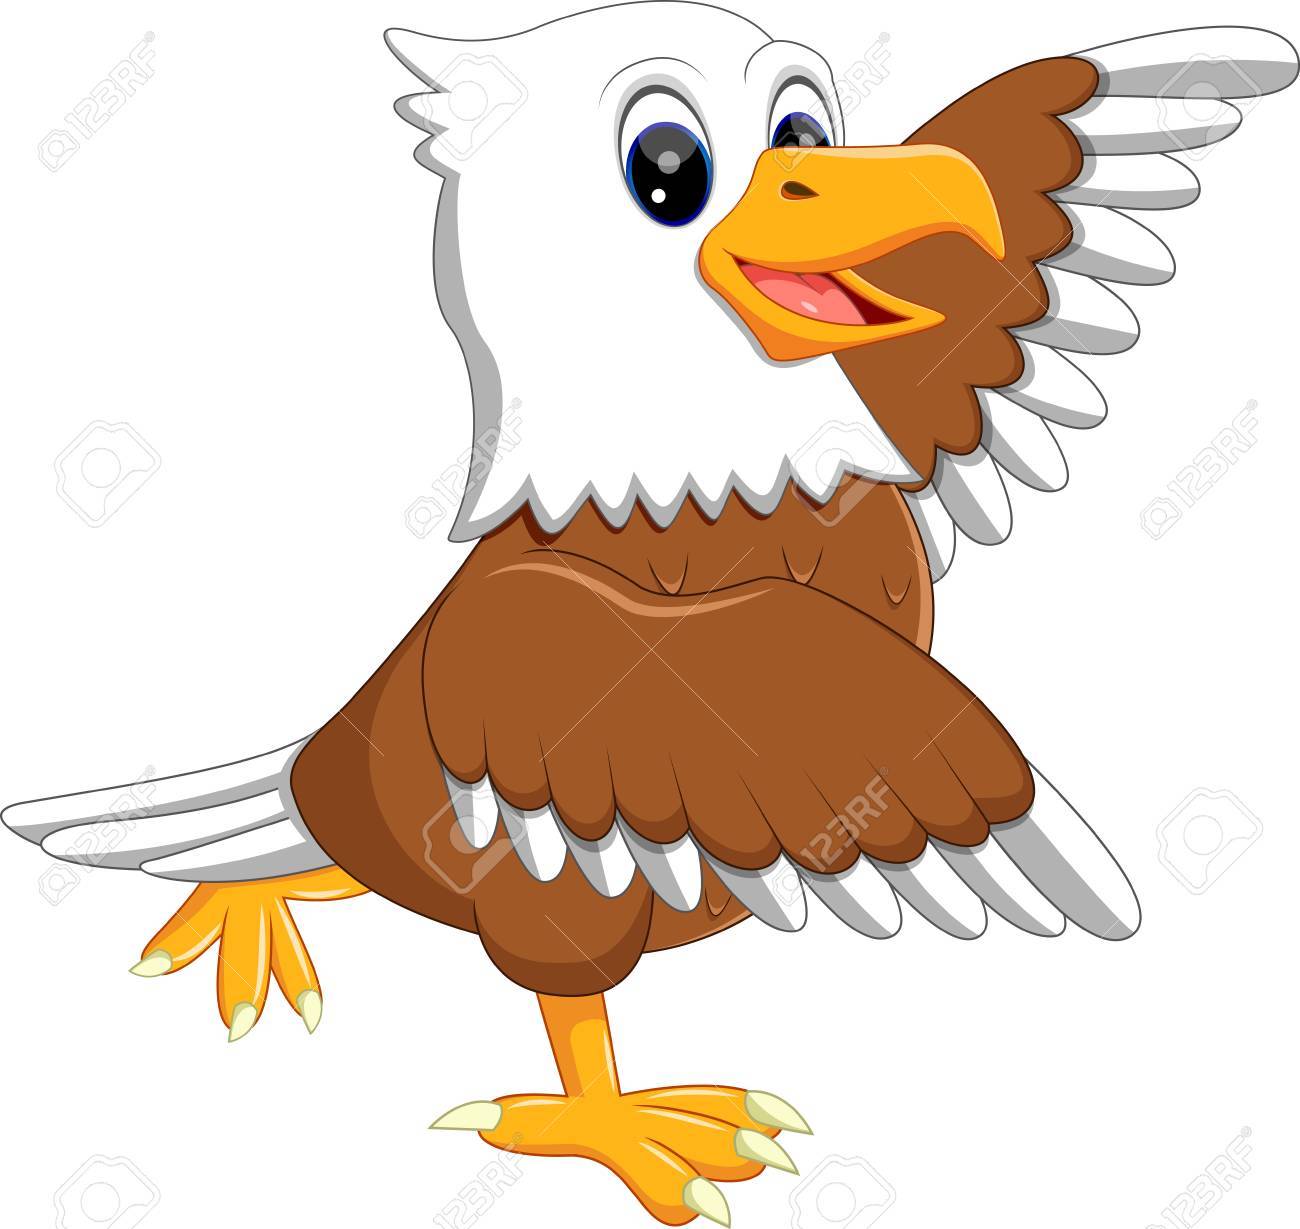 Eagles clipart cartoon, Eagles cartoon Transparent FREE for download on ...